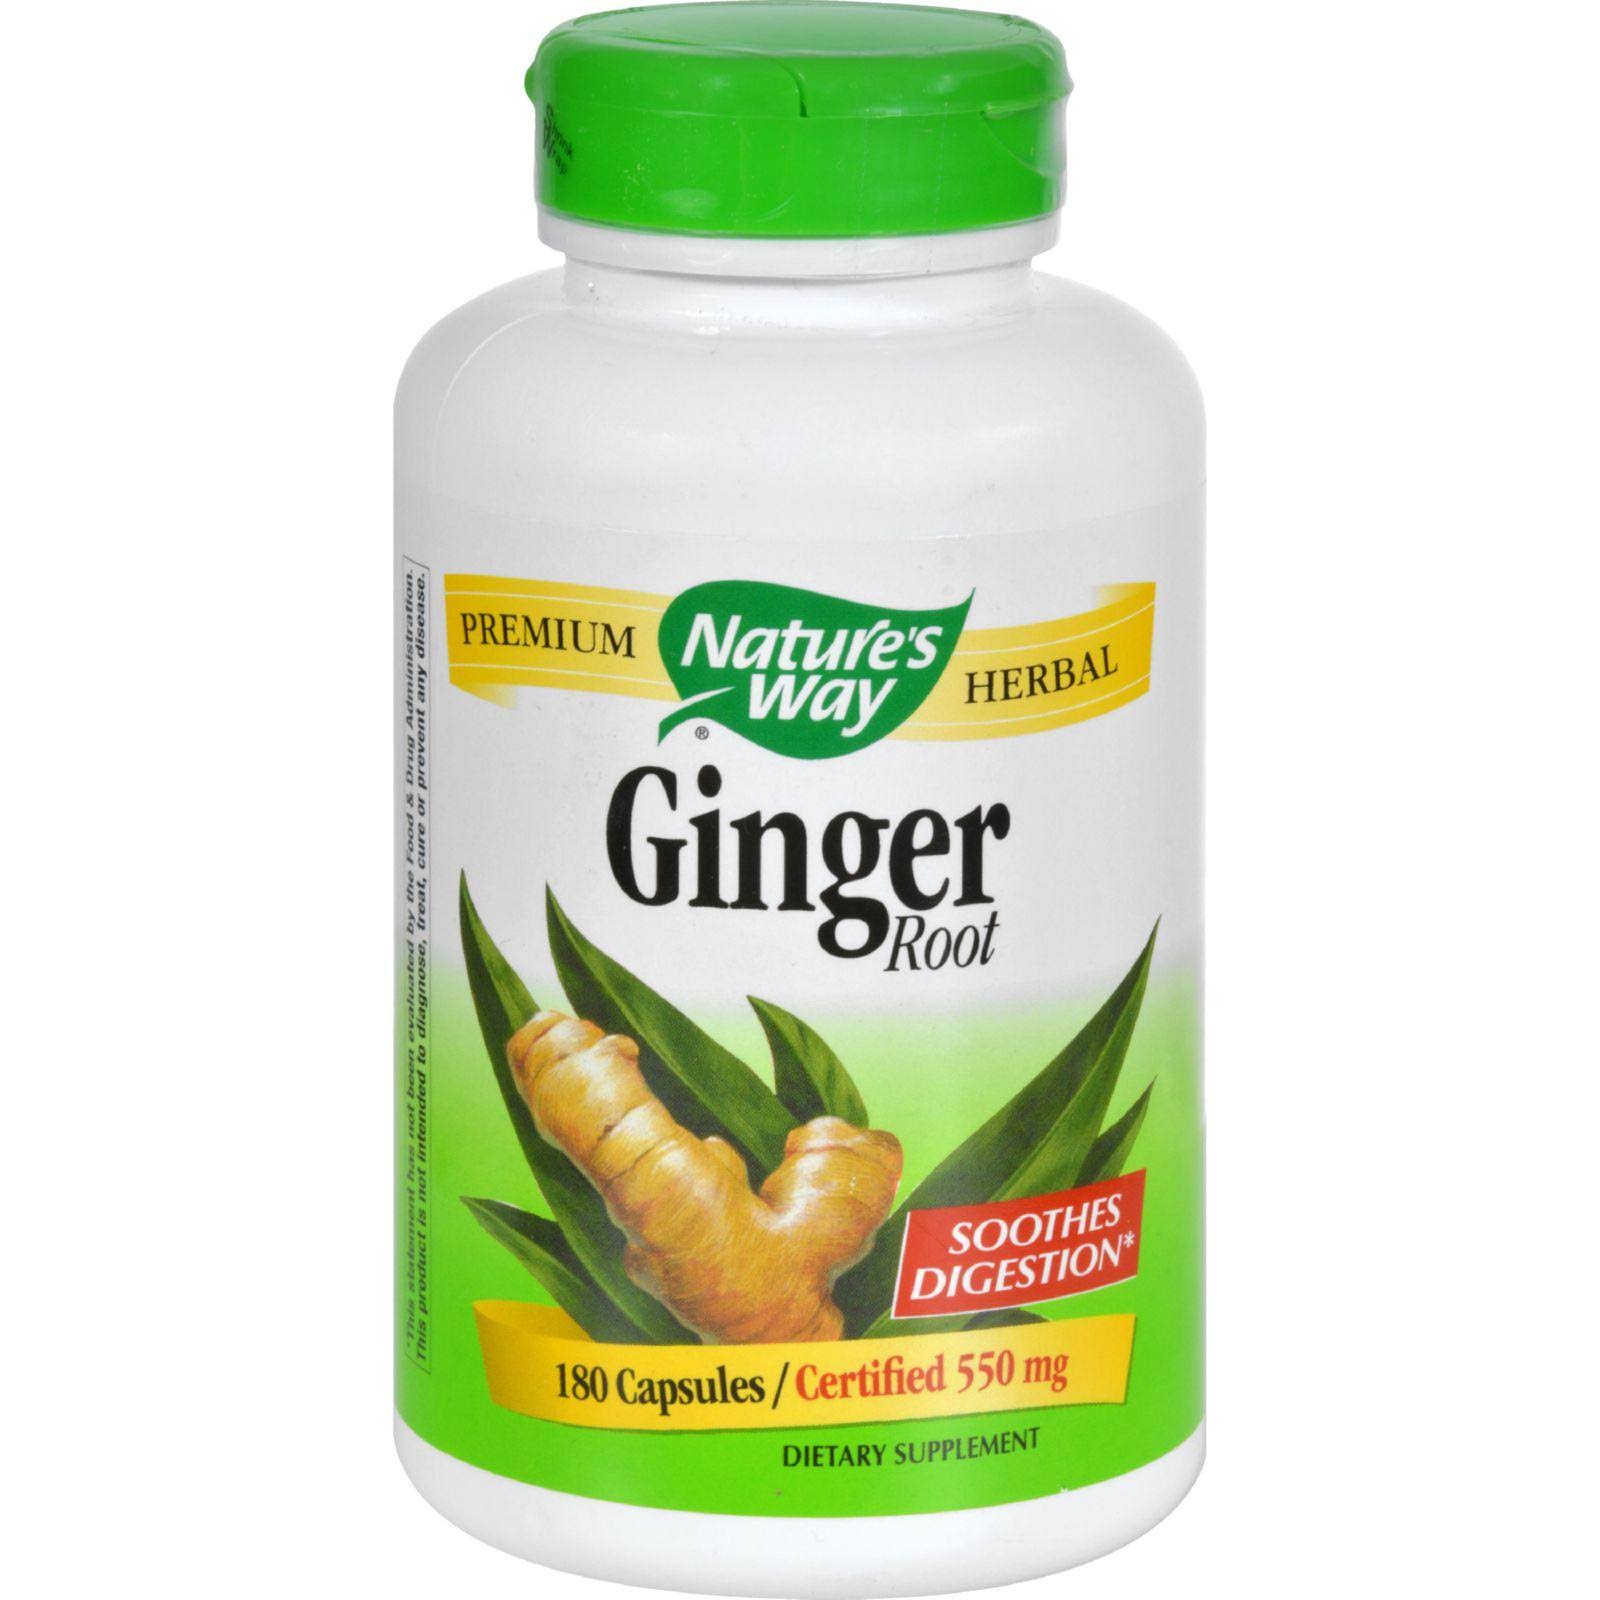 Nature's Way Ginger Root Dietary Supplement - 180 Capsules